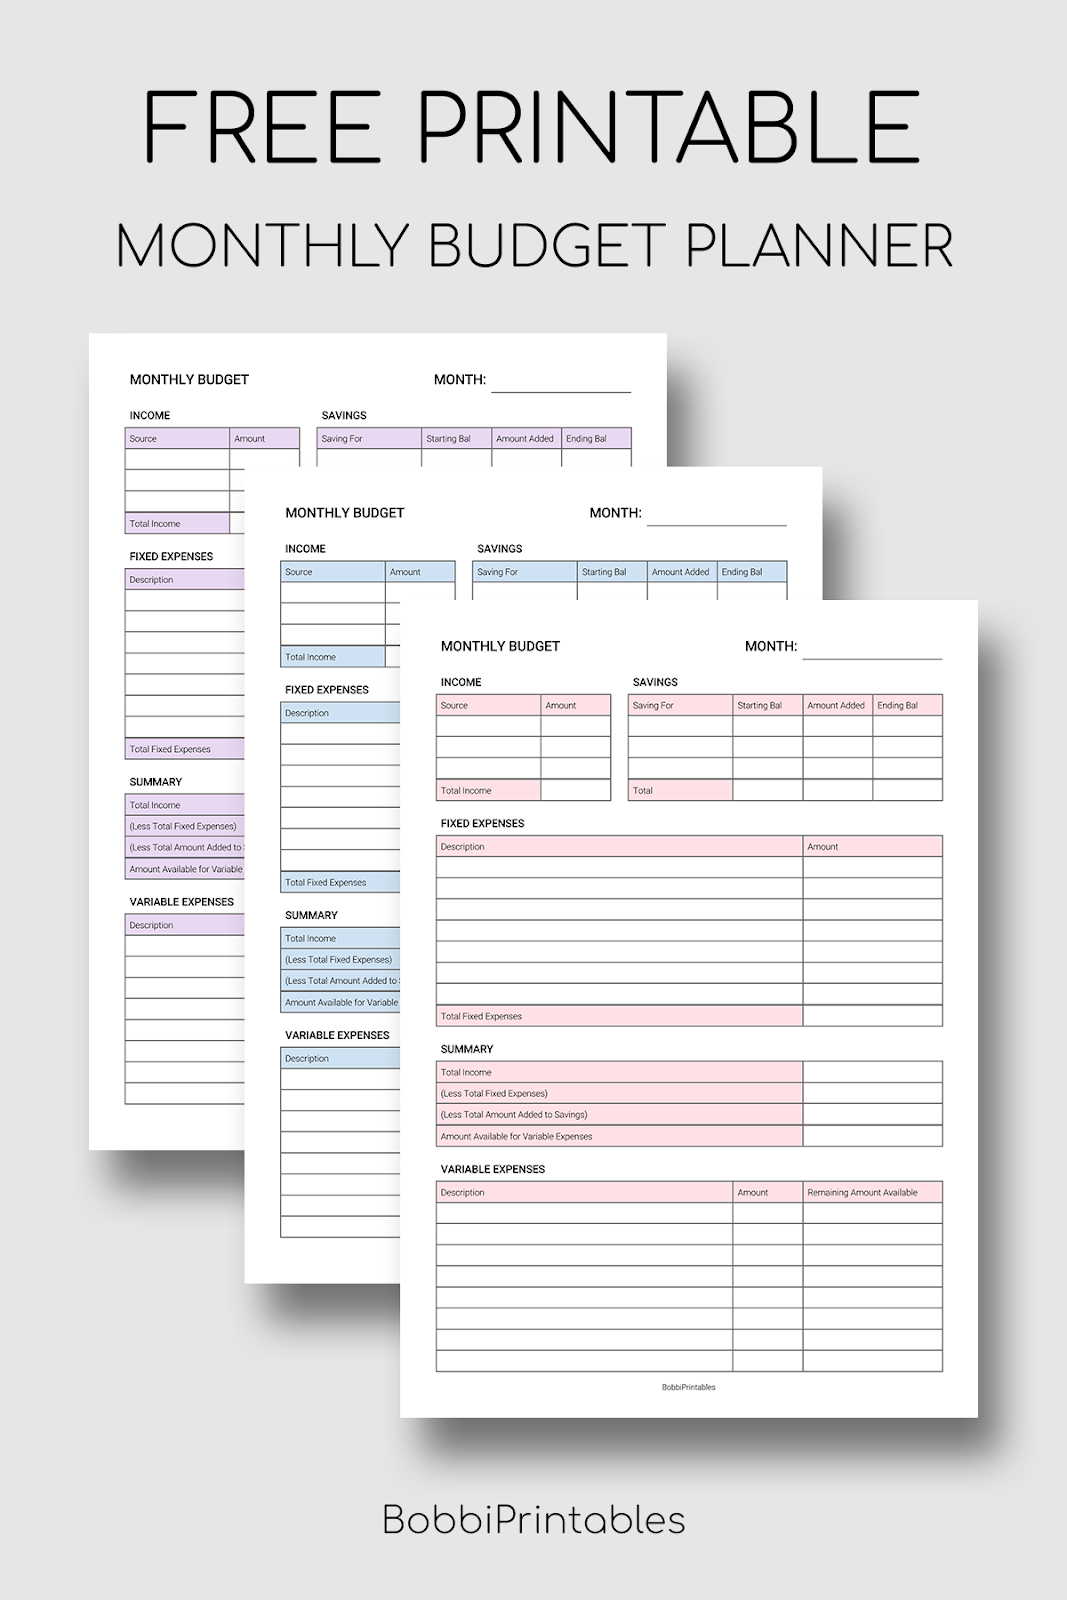 Printable Monthly Budget Planner pertaining to Budget Planner Template Online